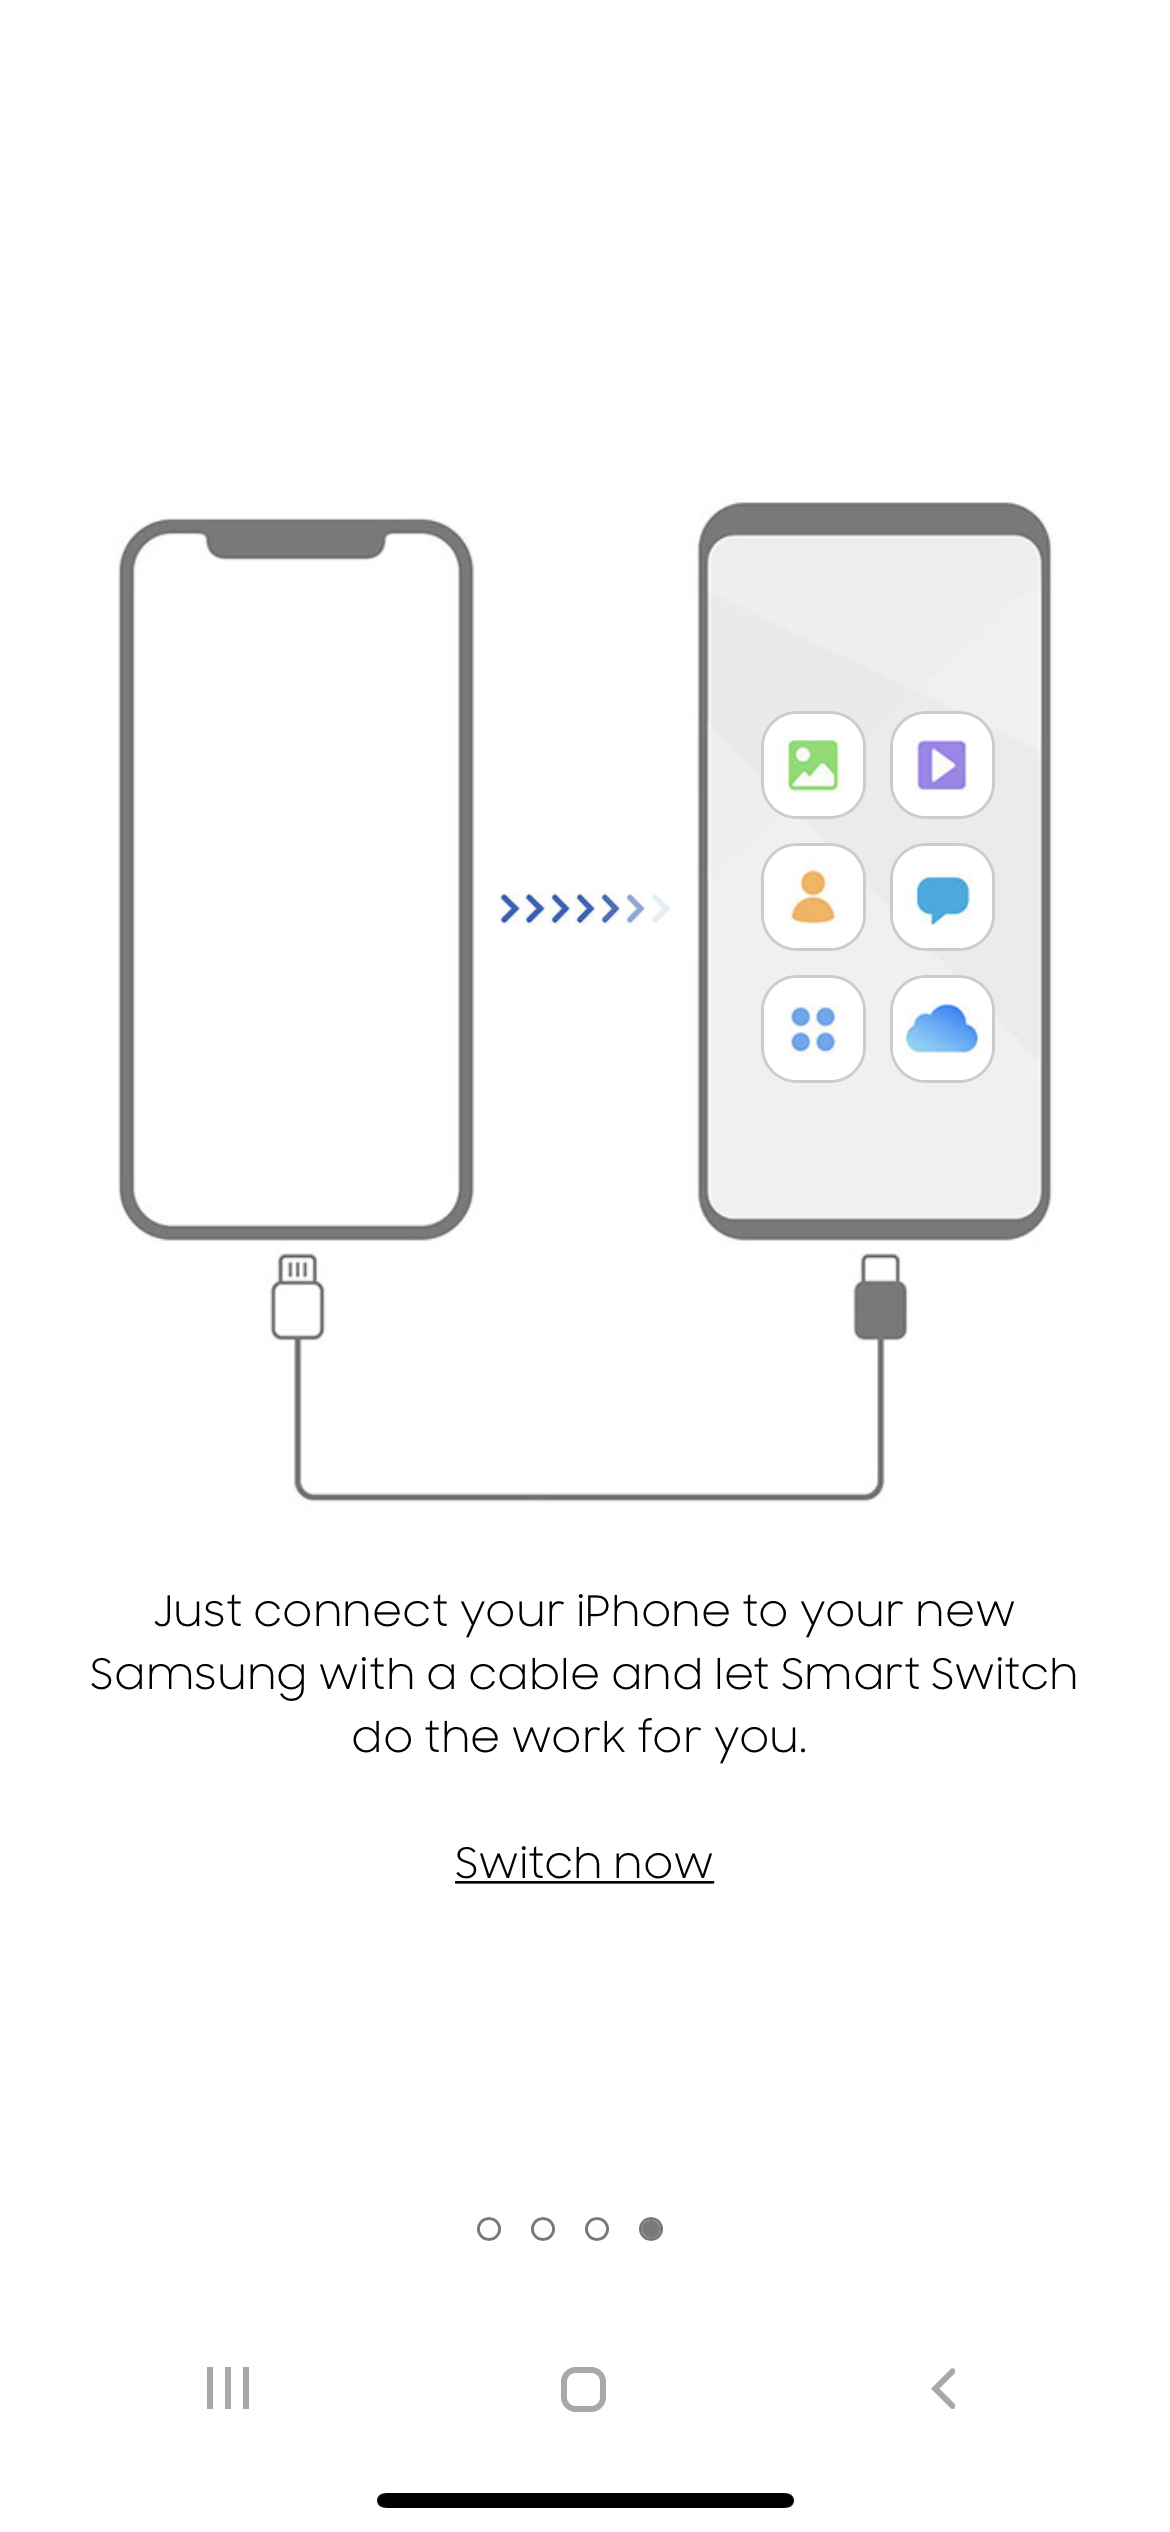 Smart Switch app illustrating how easy it is to switch to Samsung